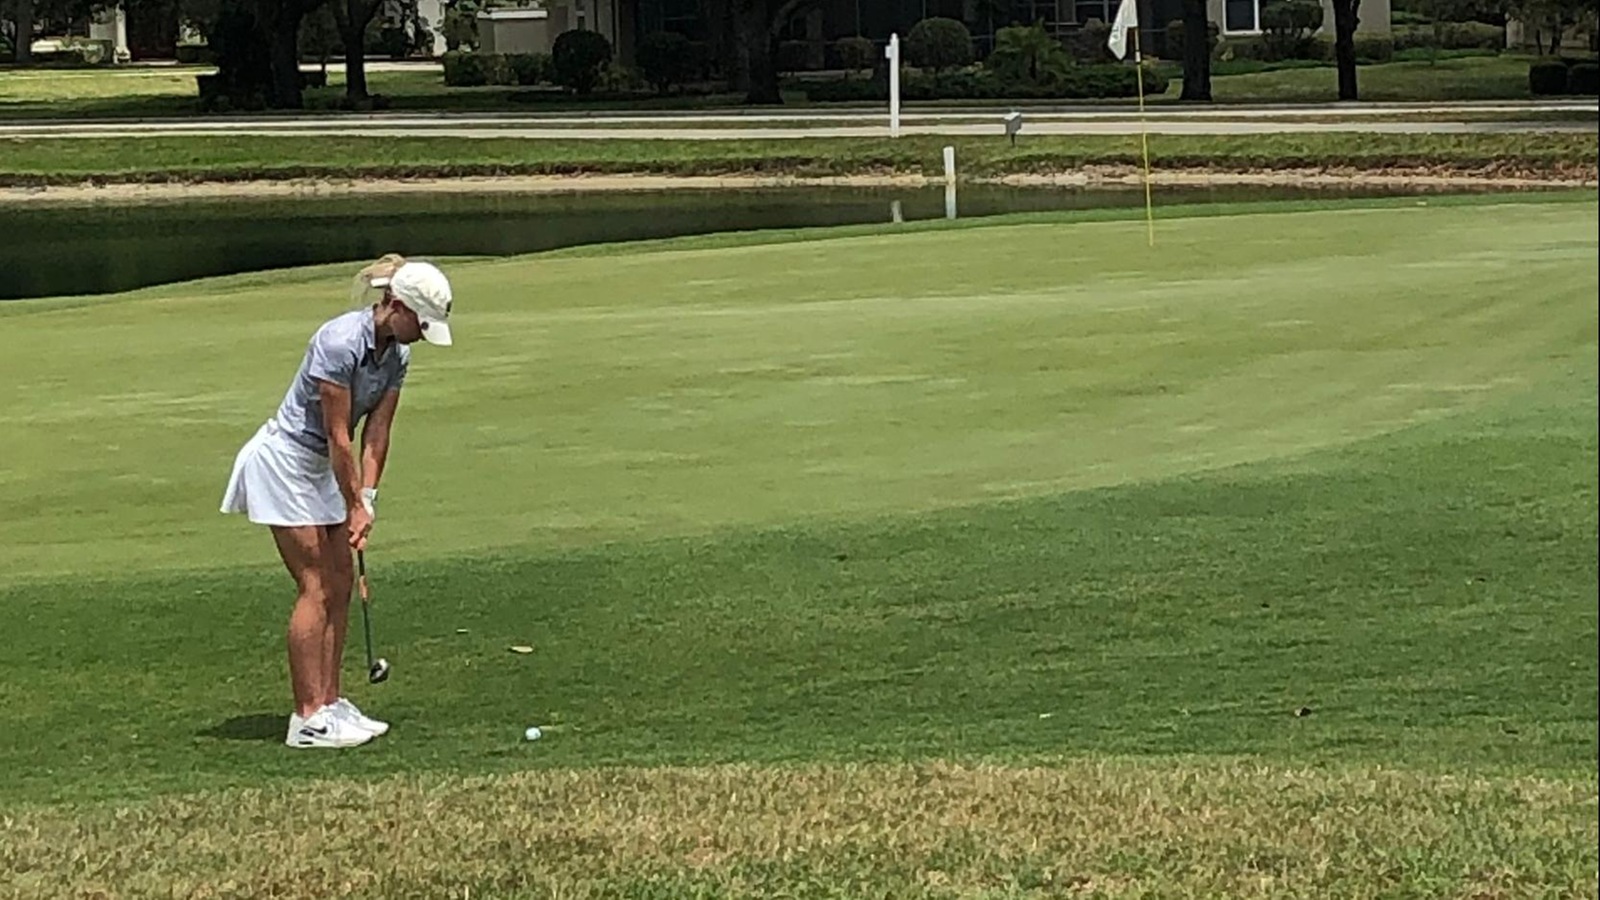 Women’s Golf two strokes off the lead; Rossouw tied for second after opening day of HL Championships